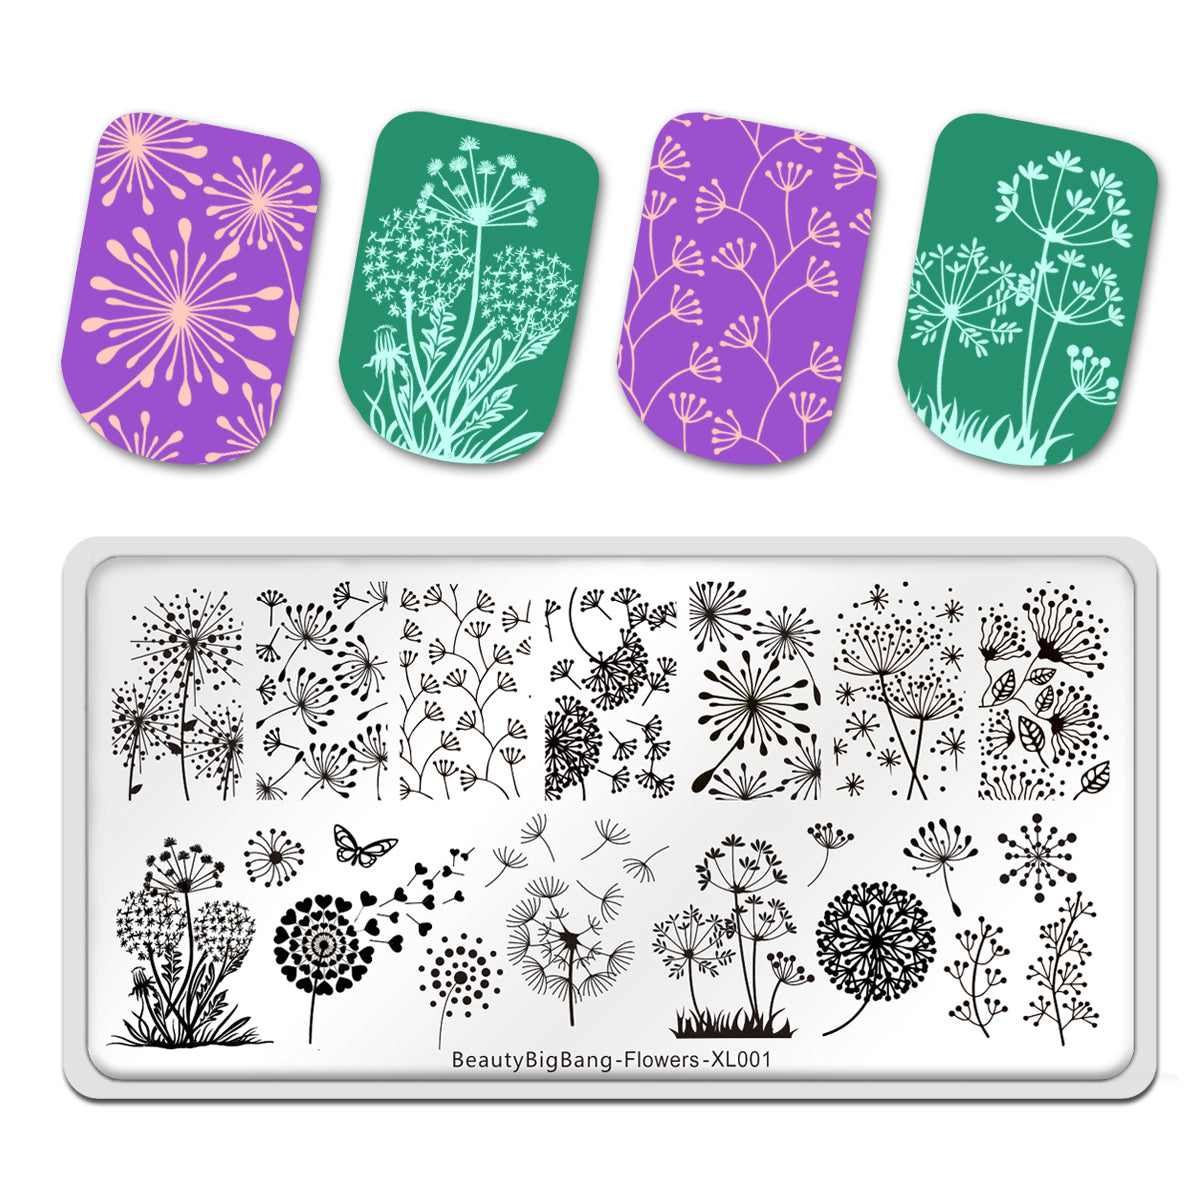 Review of Beauty Big Bang BBBXL-030 Stamping Plate